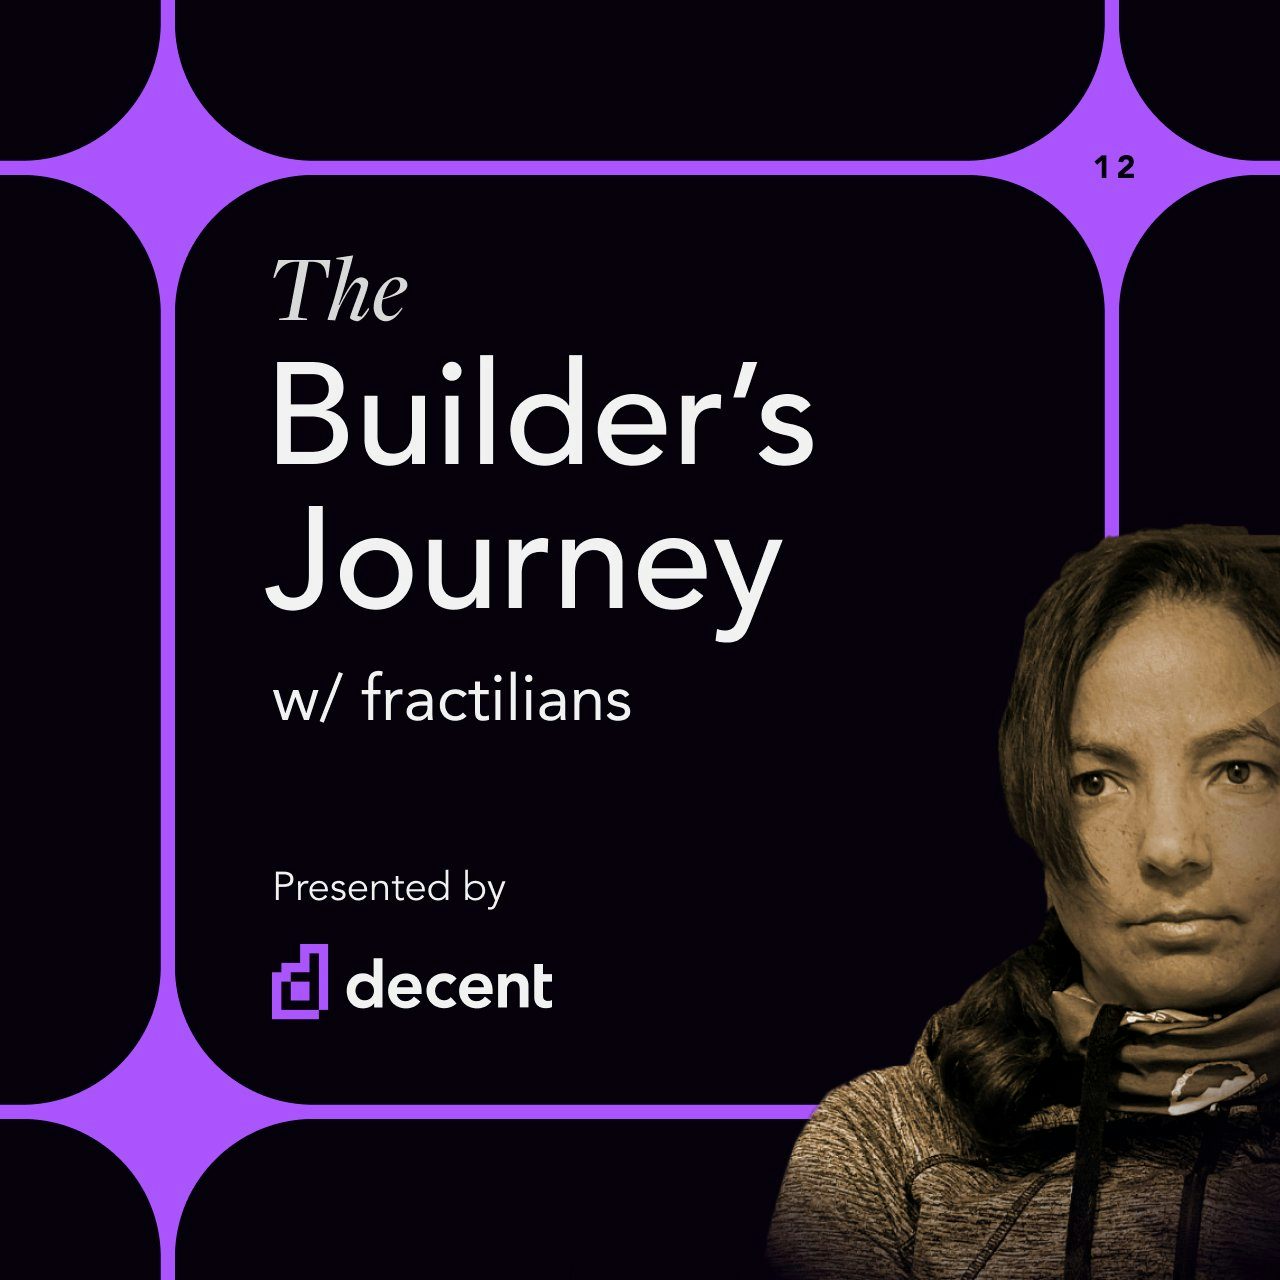 On this episode of the Builder's Journey, we chatted with fractilians, contributor at Monaverse and Decentraland DAO. Mona’s mission is to empower billions of people to create, collect, and share high-quality metaverse experiences on the blockchain. Decentraland is the first fully decentralized world controlled via a DAO. Fractilians discusses carving her own path in Web3 via grants, building communities of builders, and the state of metaverses.